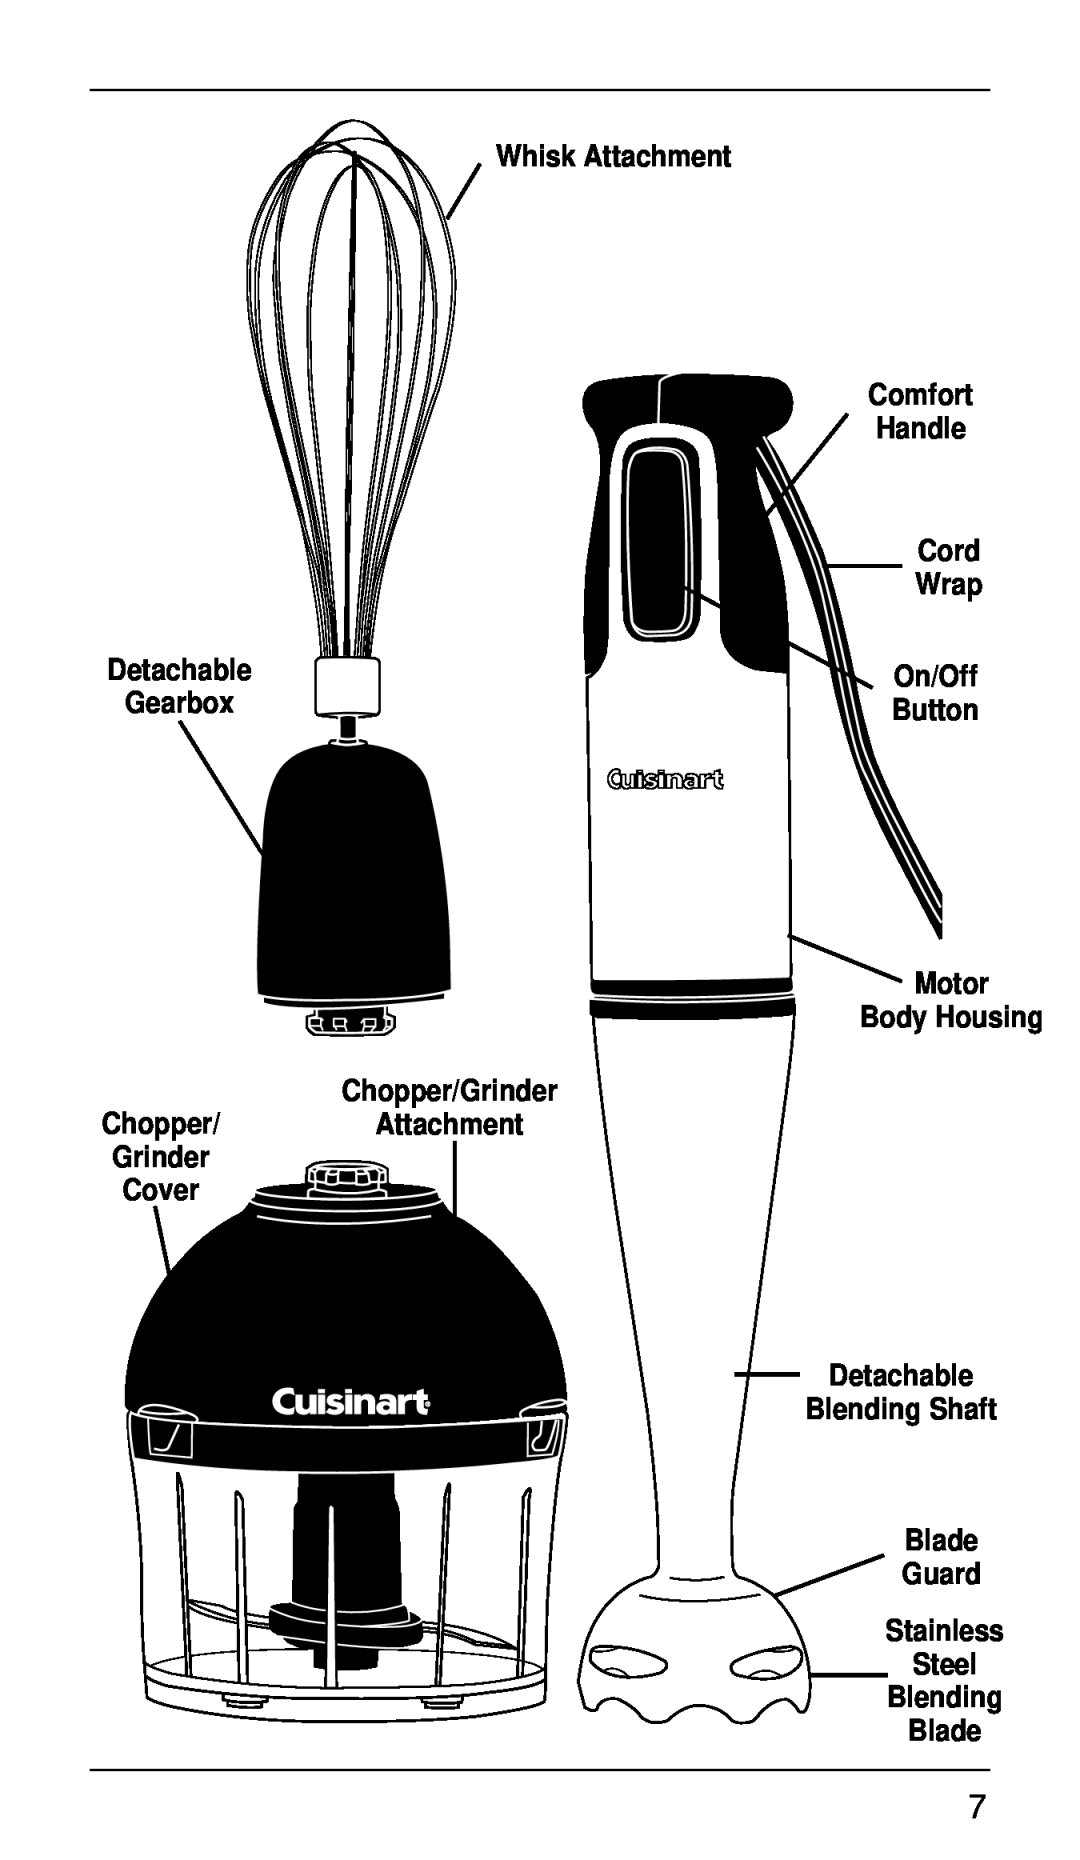 Cuisinart CSB-77 manual Whisk Attachment Comfort Handle Cord Wrap, On/Off, Detachable, Gearbox, Button 